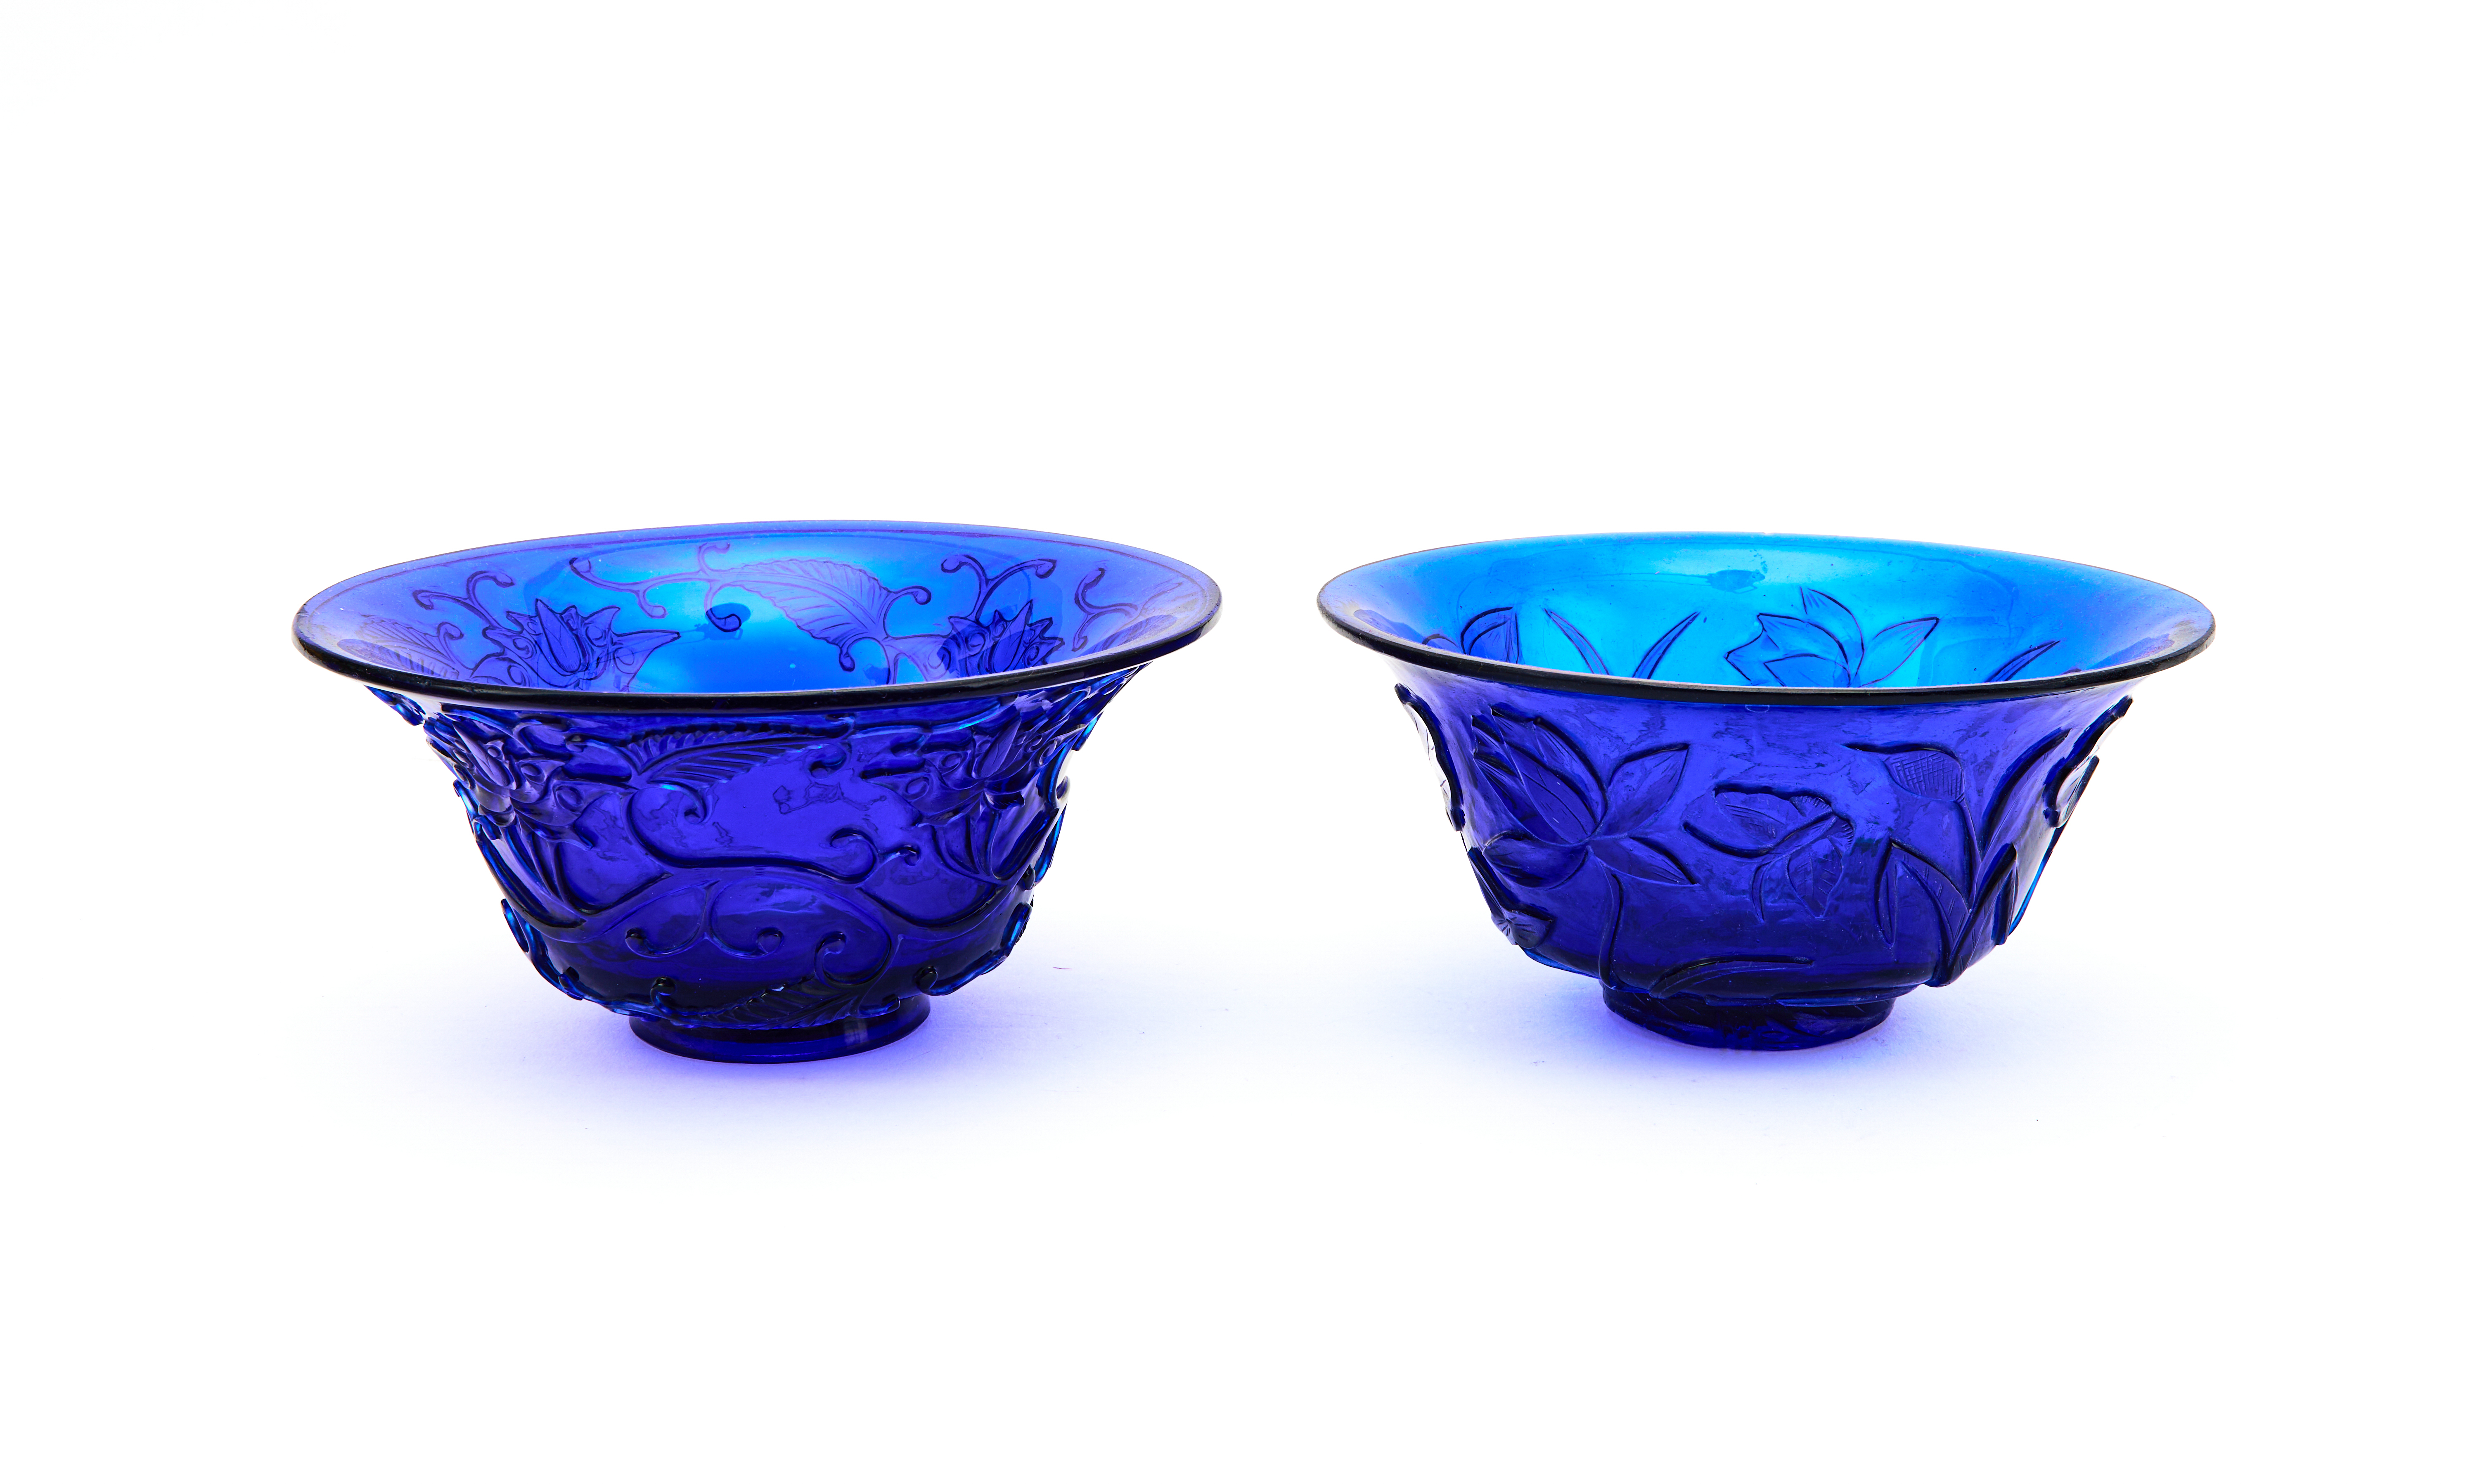 A PAIR OF CARVED BLUE GLASS BOWLS CHINA, QING DYNASTY (1644-1911)